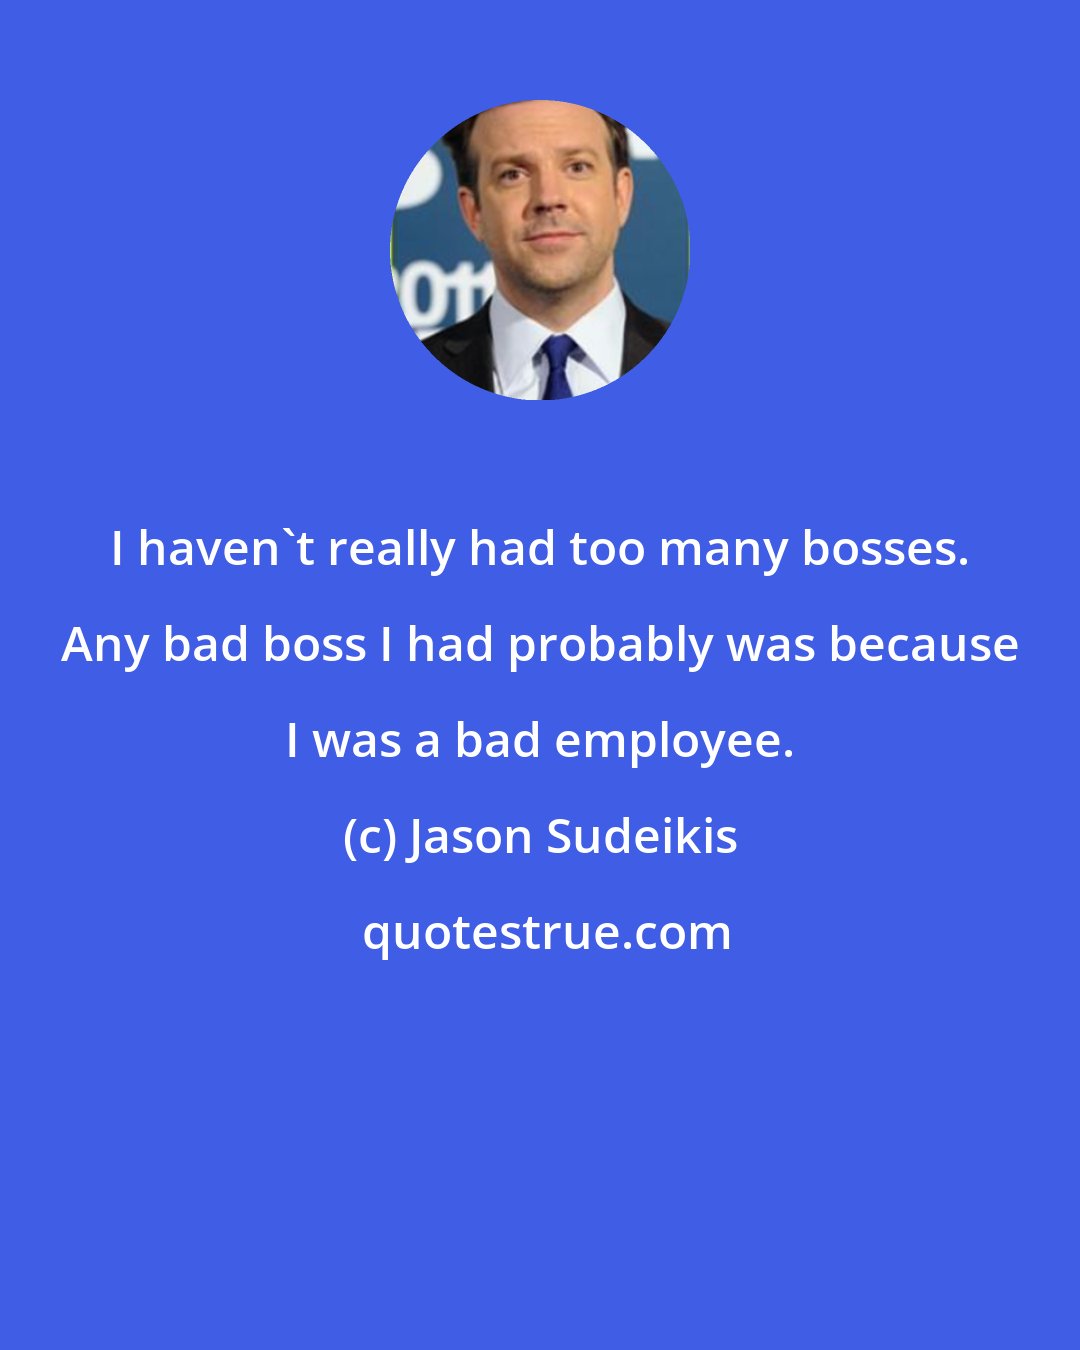 Jason Sudeikis: I haven't really had too many bosses. Any bad boss I had probably was because I was a bad employee.